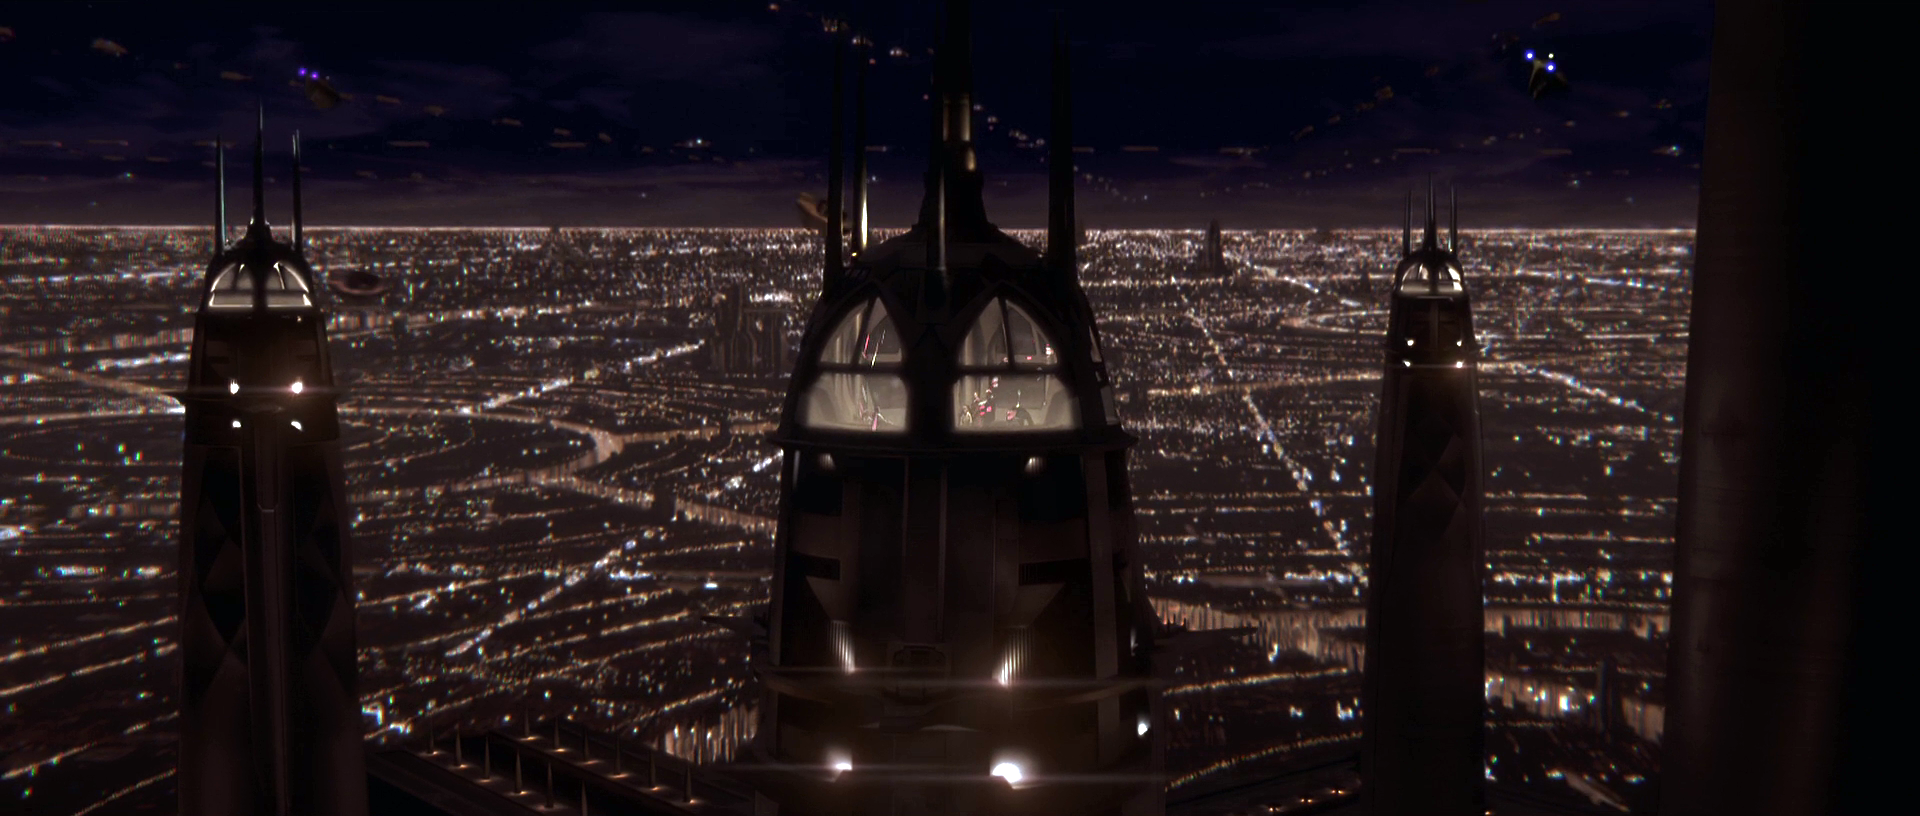 Download High Council Tower | Wookieepedia | FANDOM powered by Wikia